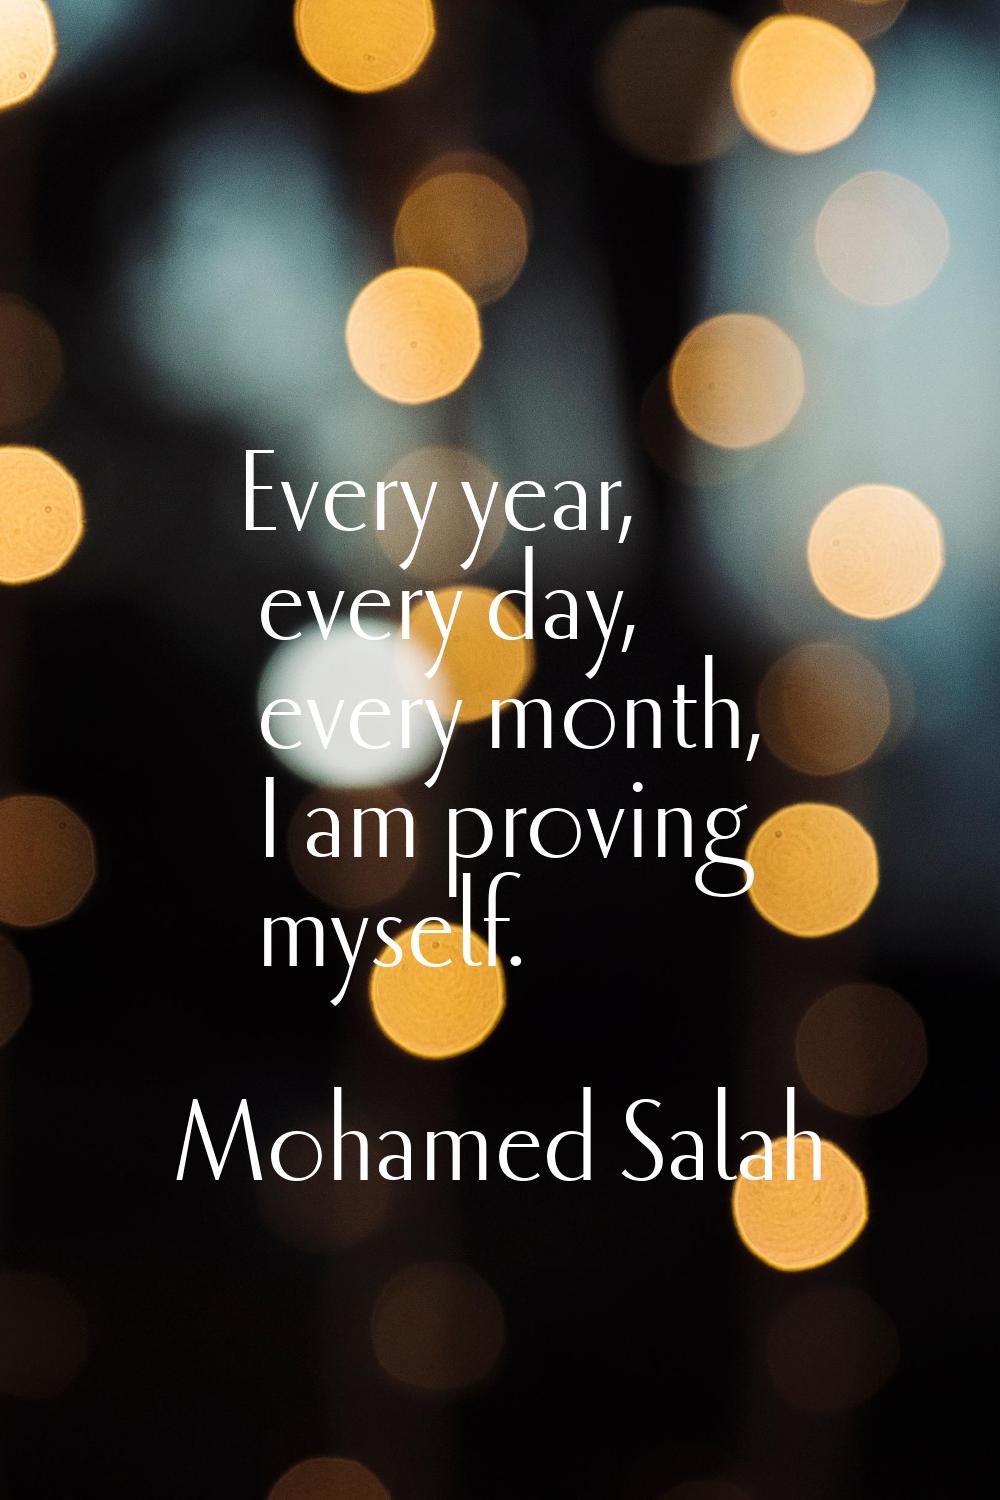 Every year, every day, every month, I am proving myself.